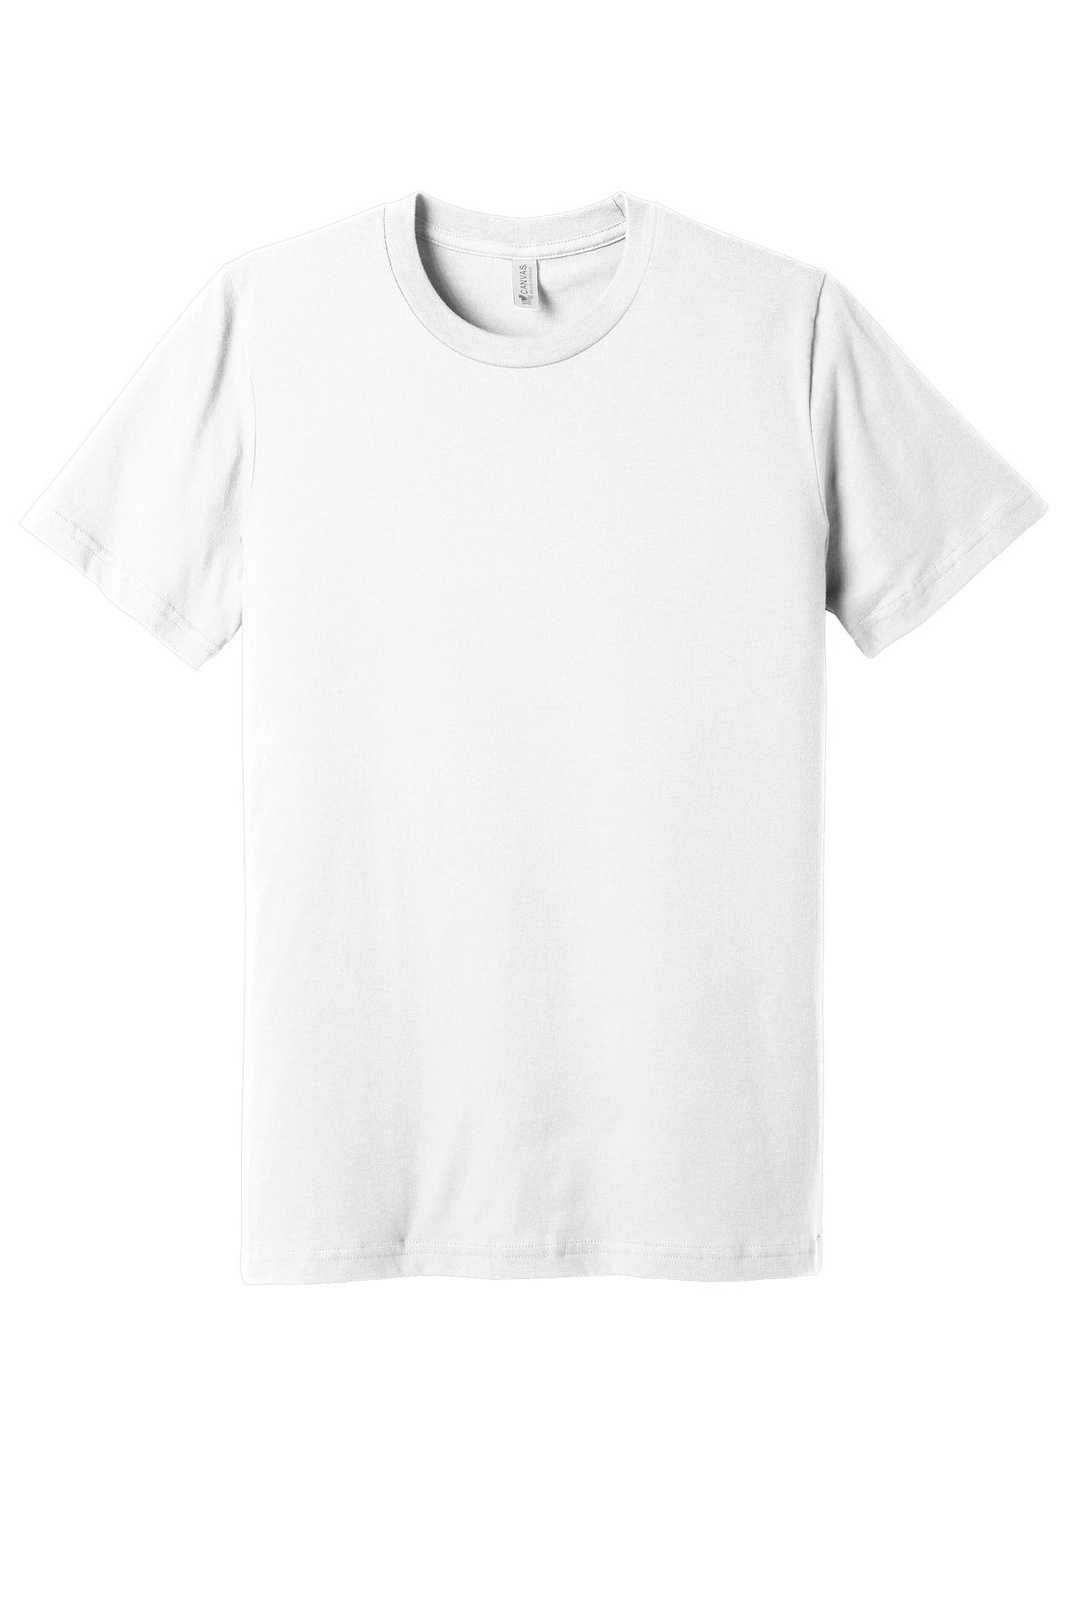 Bella + Canvas 3001U Unisex Made In The USA Jersey Short Sleeve Tee - White - HIT a Double